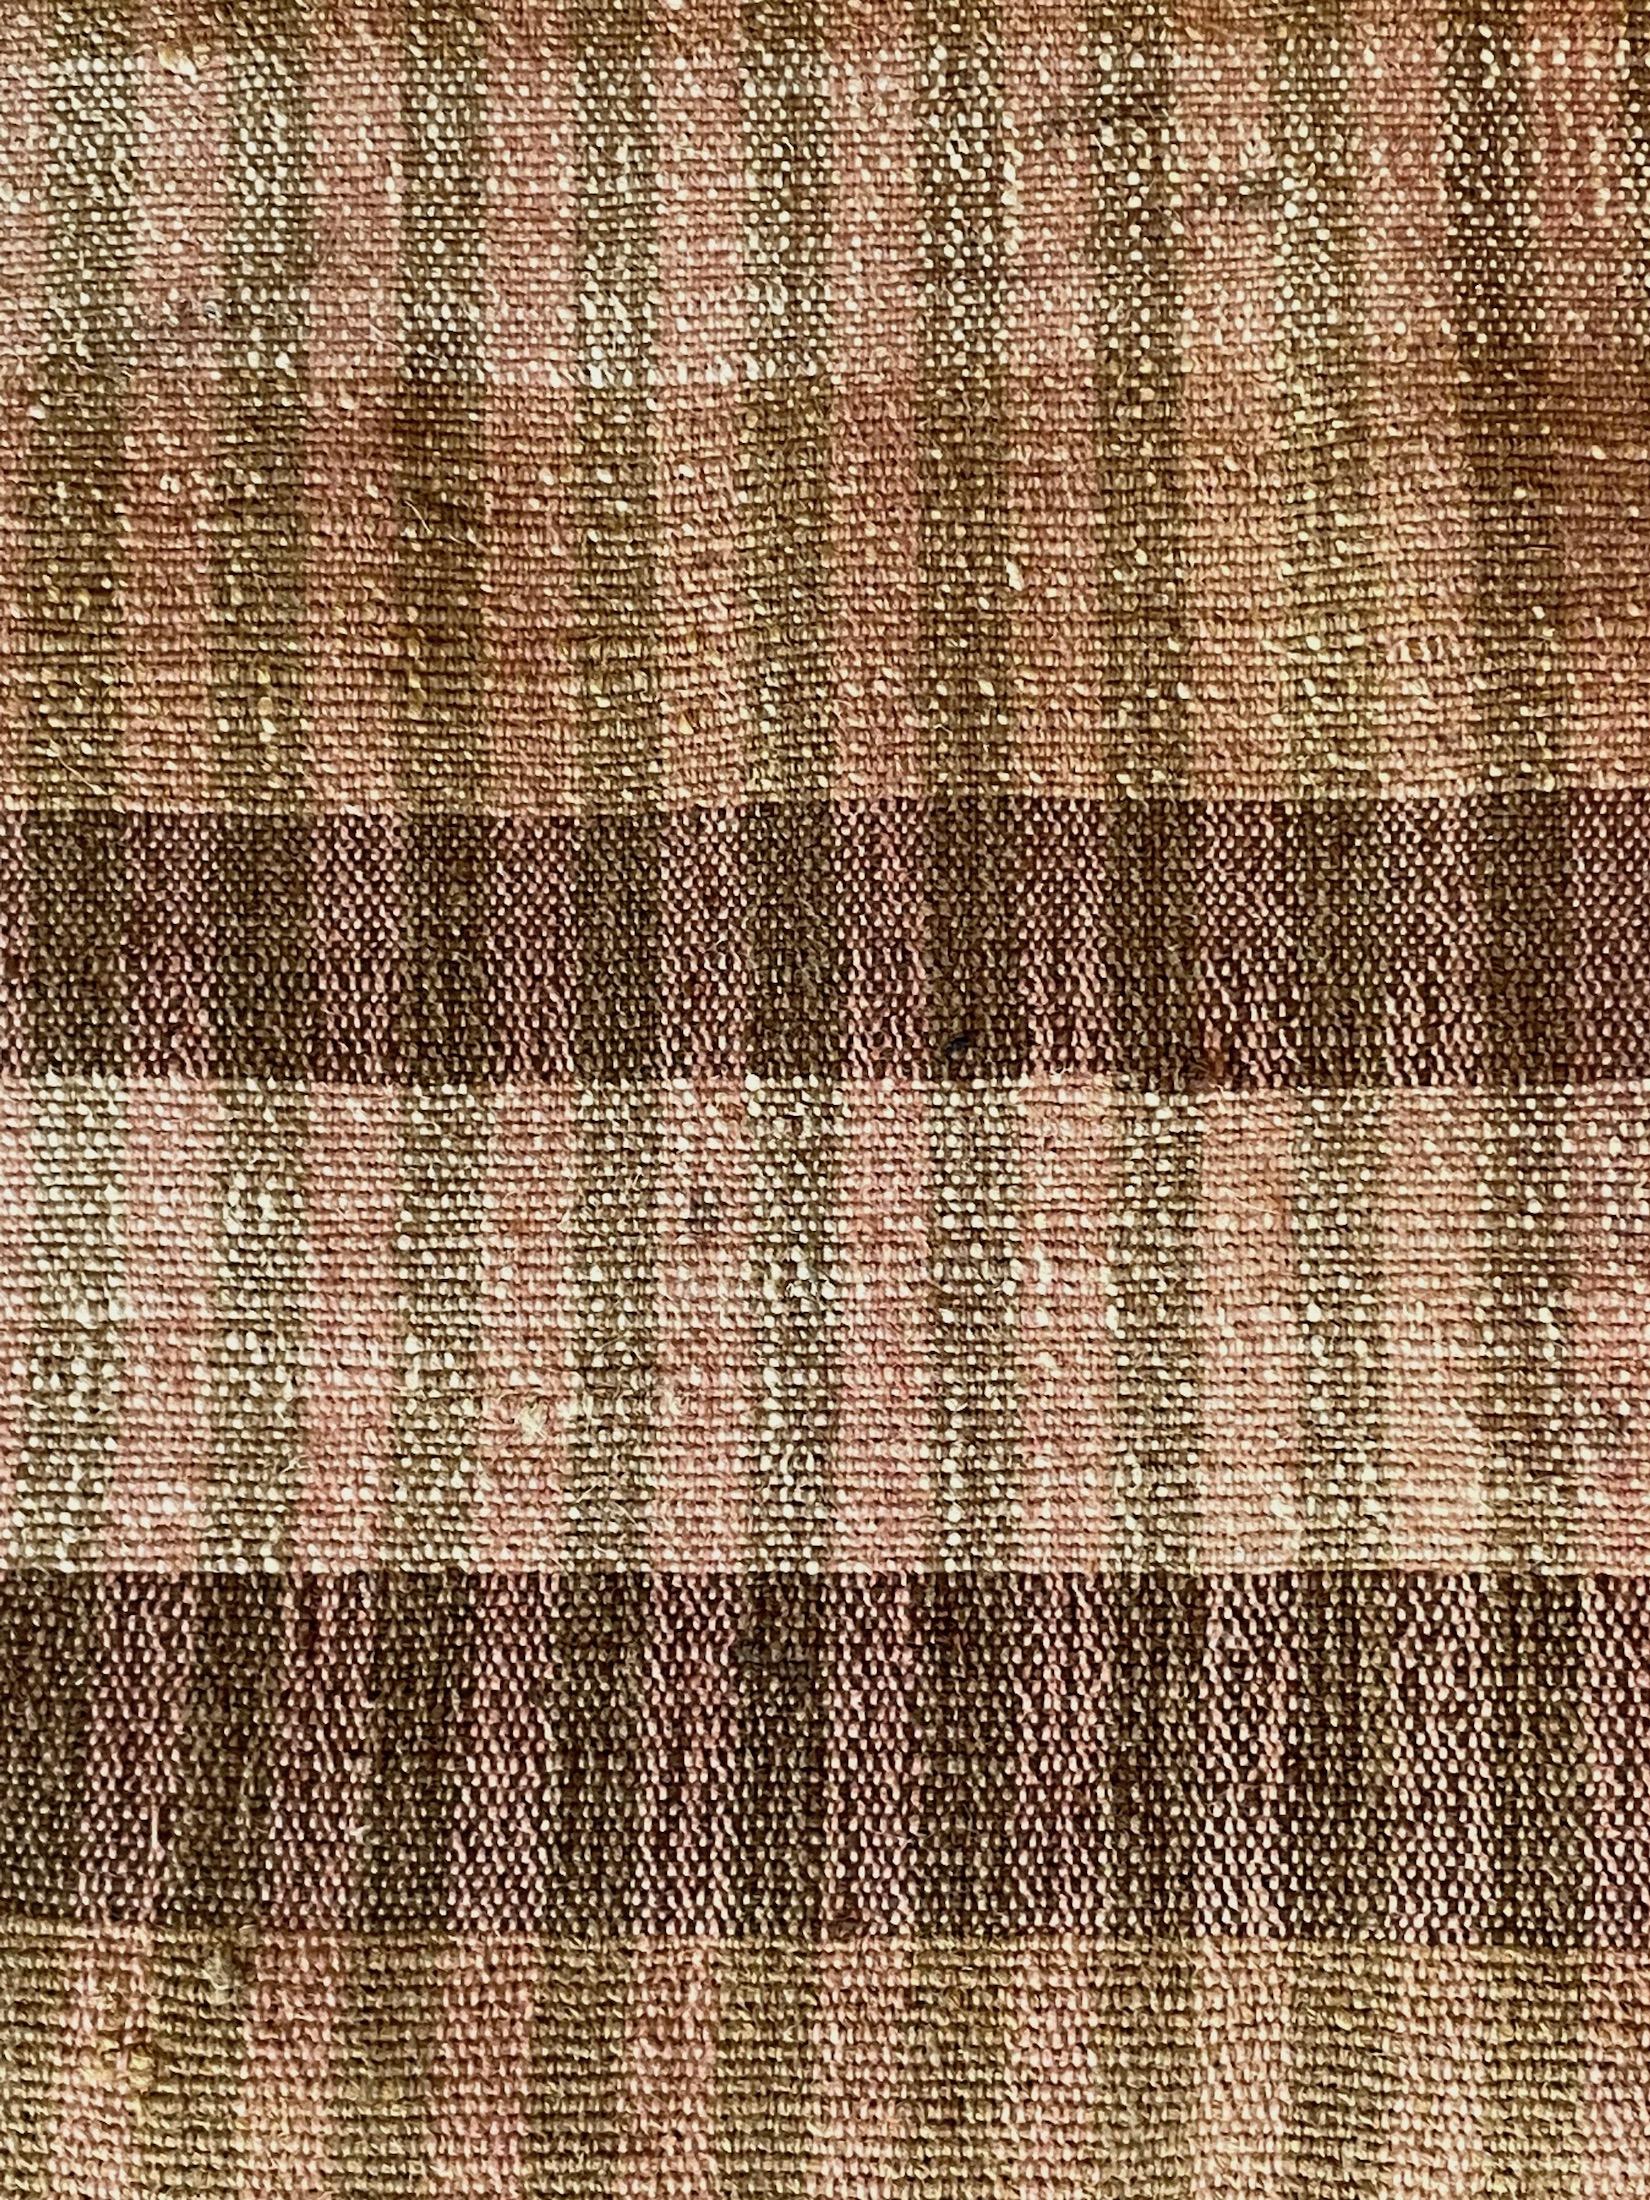 Midcentury Portuguese pillow made from handwoven fabric used originally as flour sacks.
New down and feather insert.
Brown, cream, pale mauve and olive stripes.